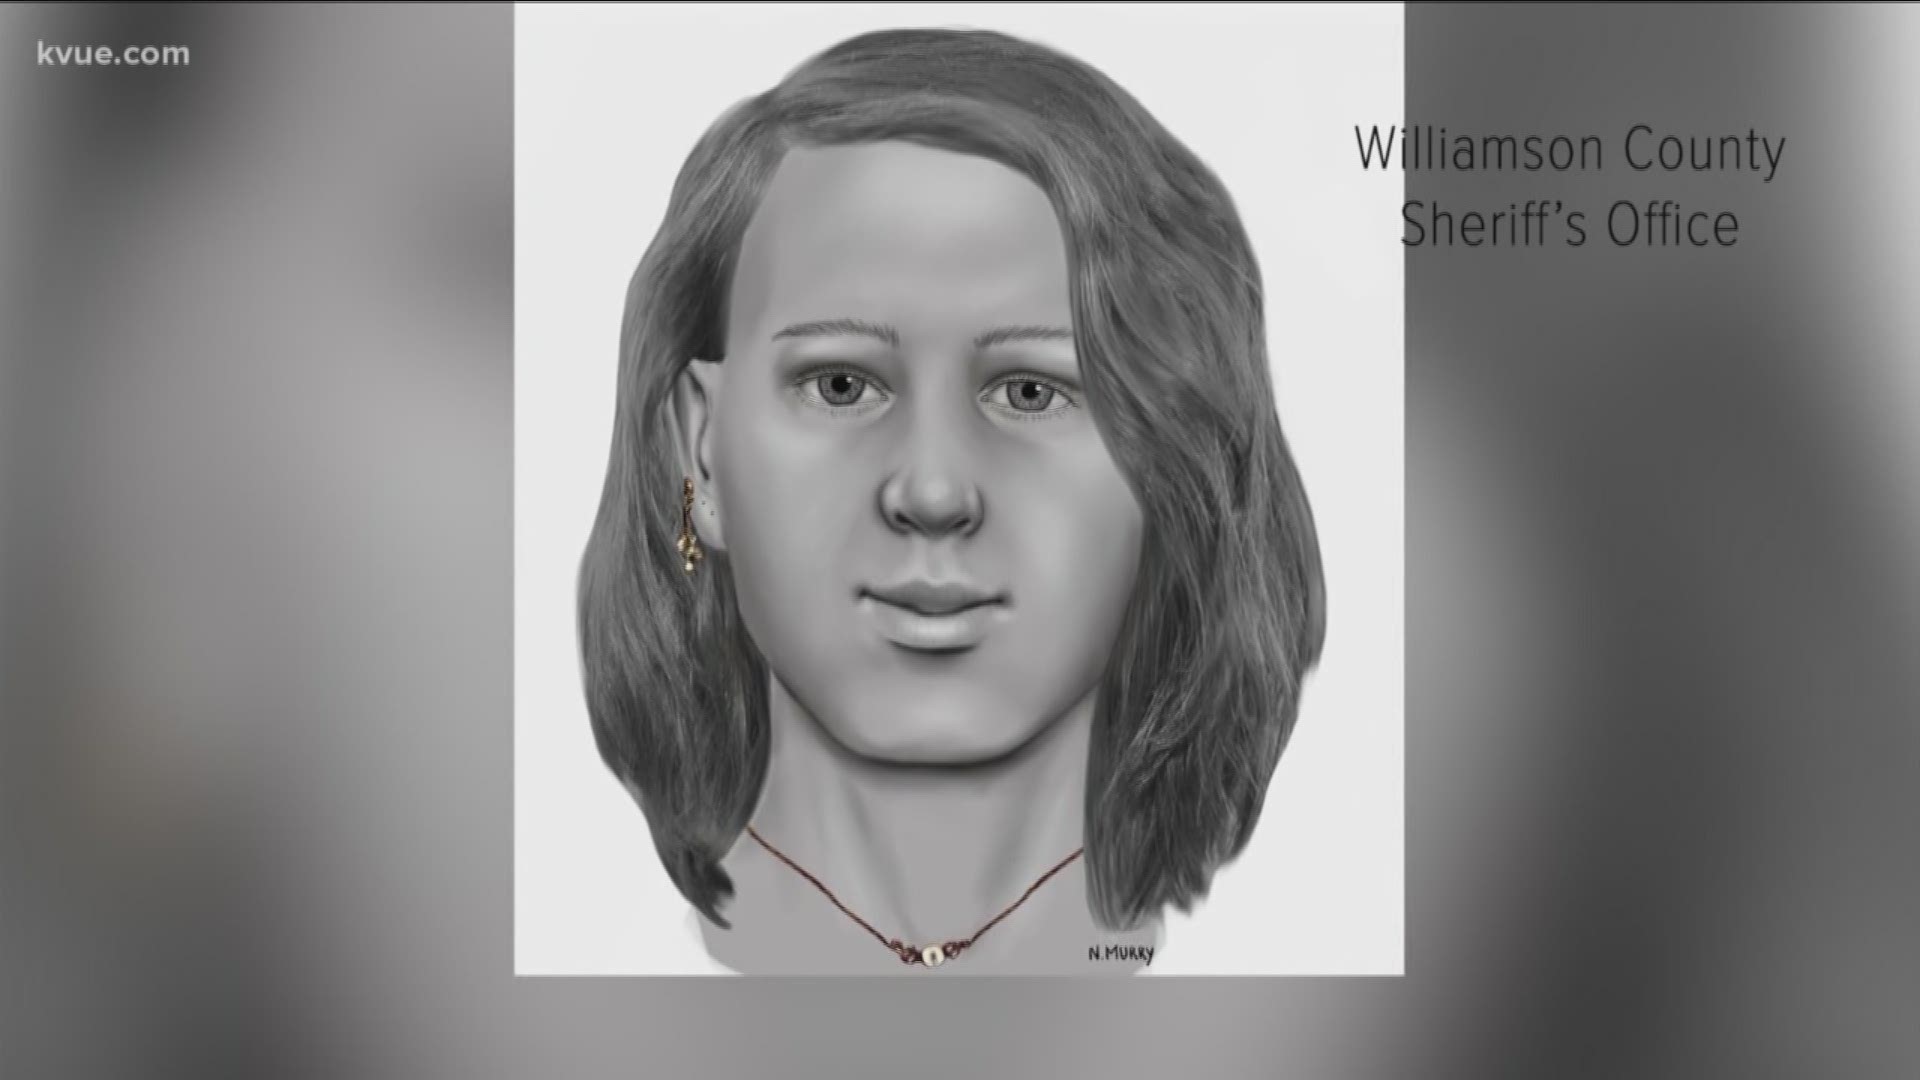 More than three decades after her body was found, Williamson County investigators have finally identified the murder victim known only as "Corona Girl."